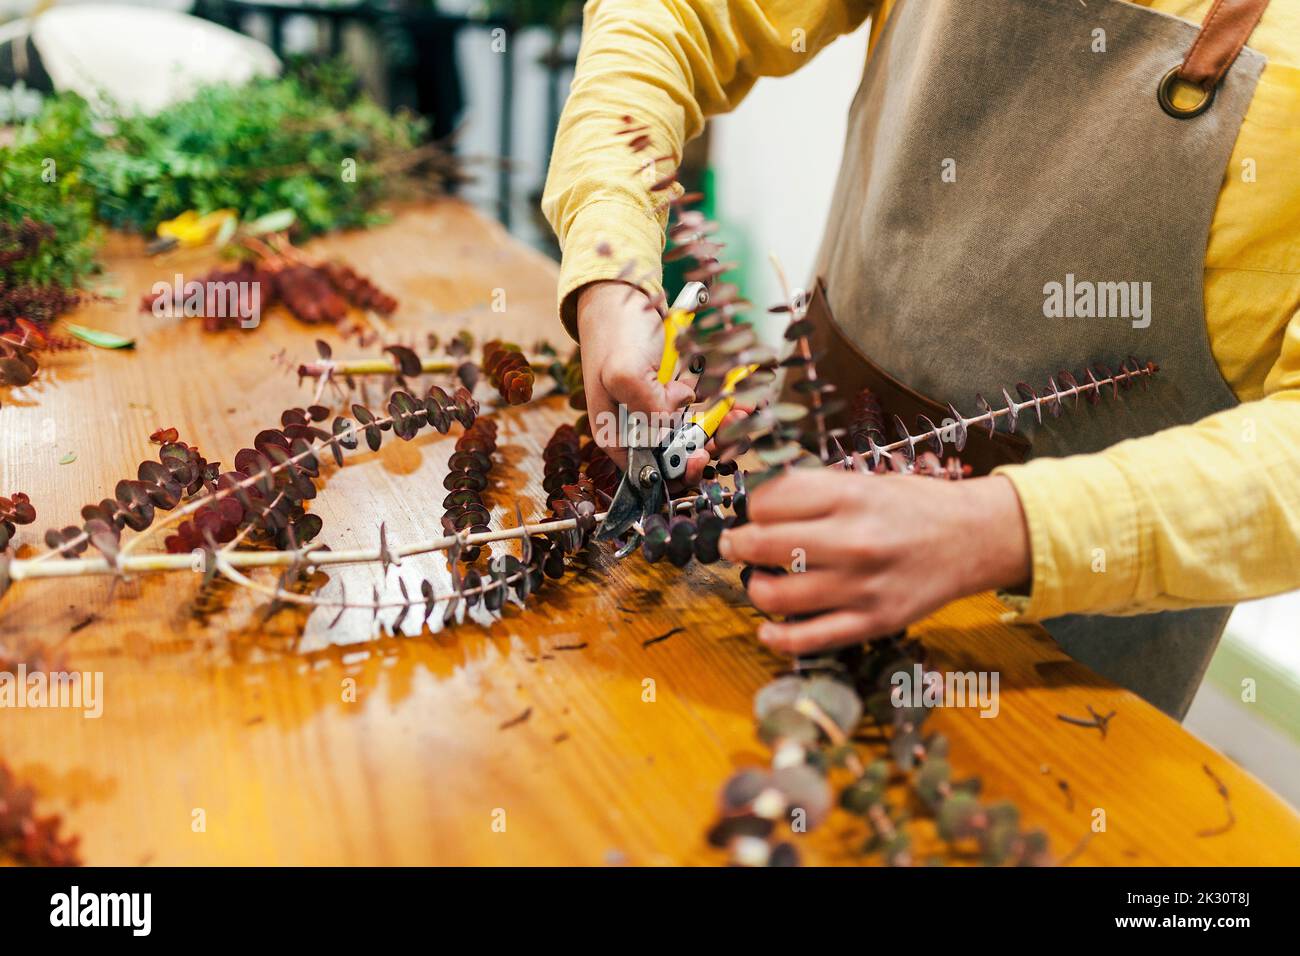 Craftsman cutting stem of plant at flower shop Stock Photo